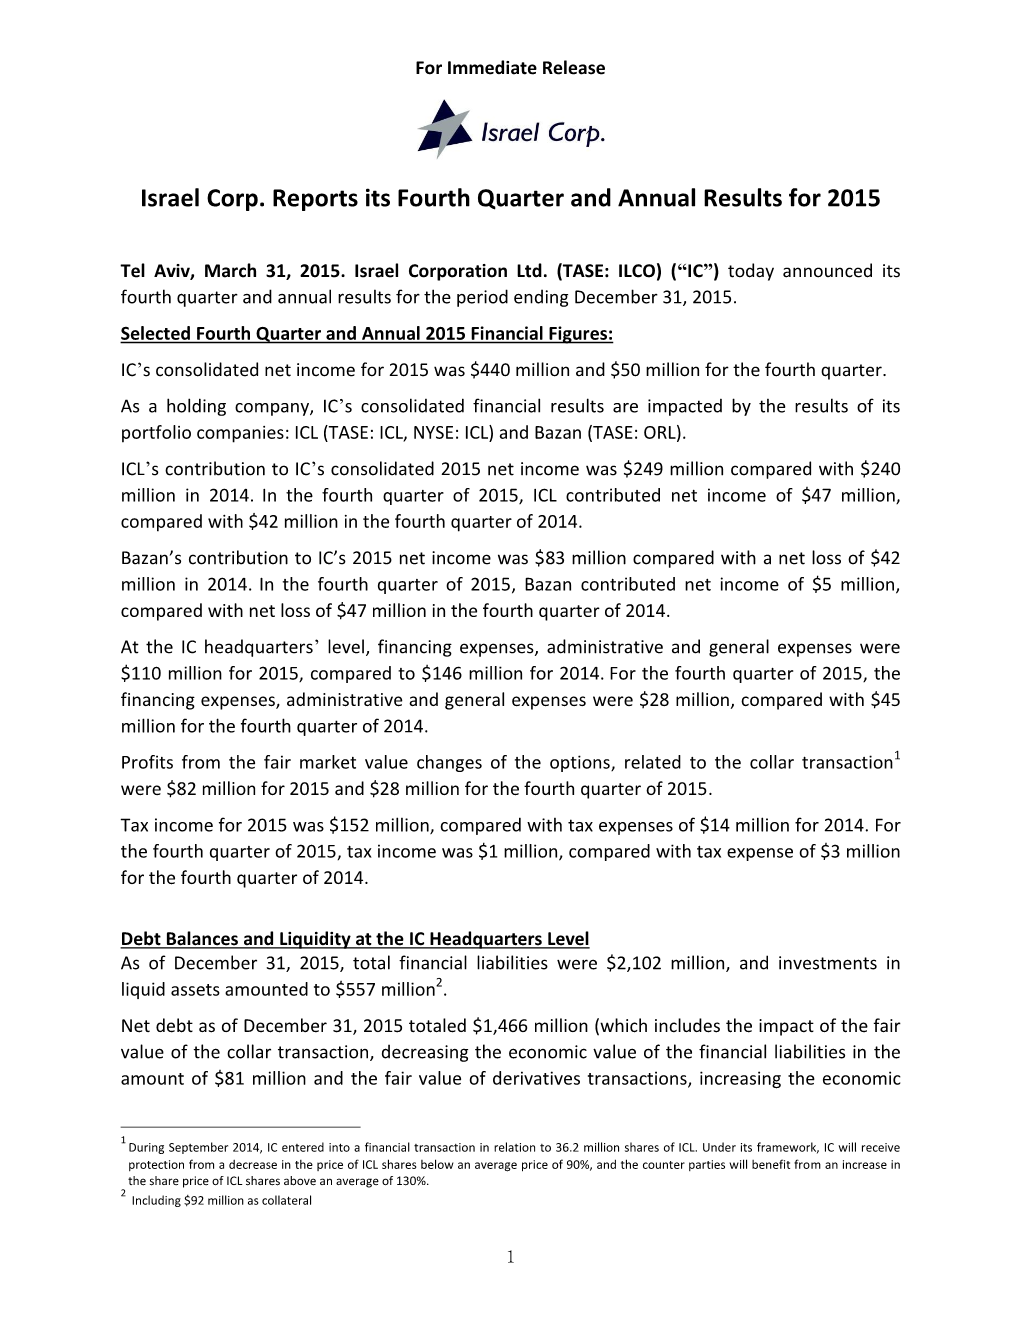 Israel Corp. Reports Its Fourth Quarter and Annual Results for 2015